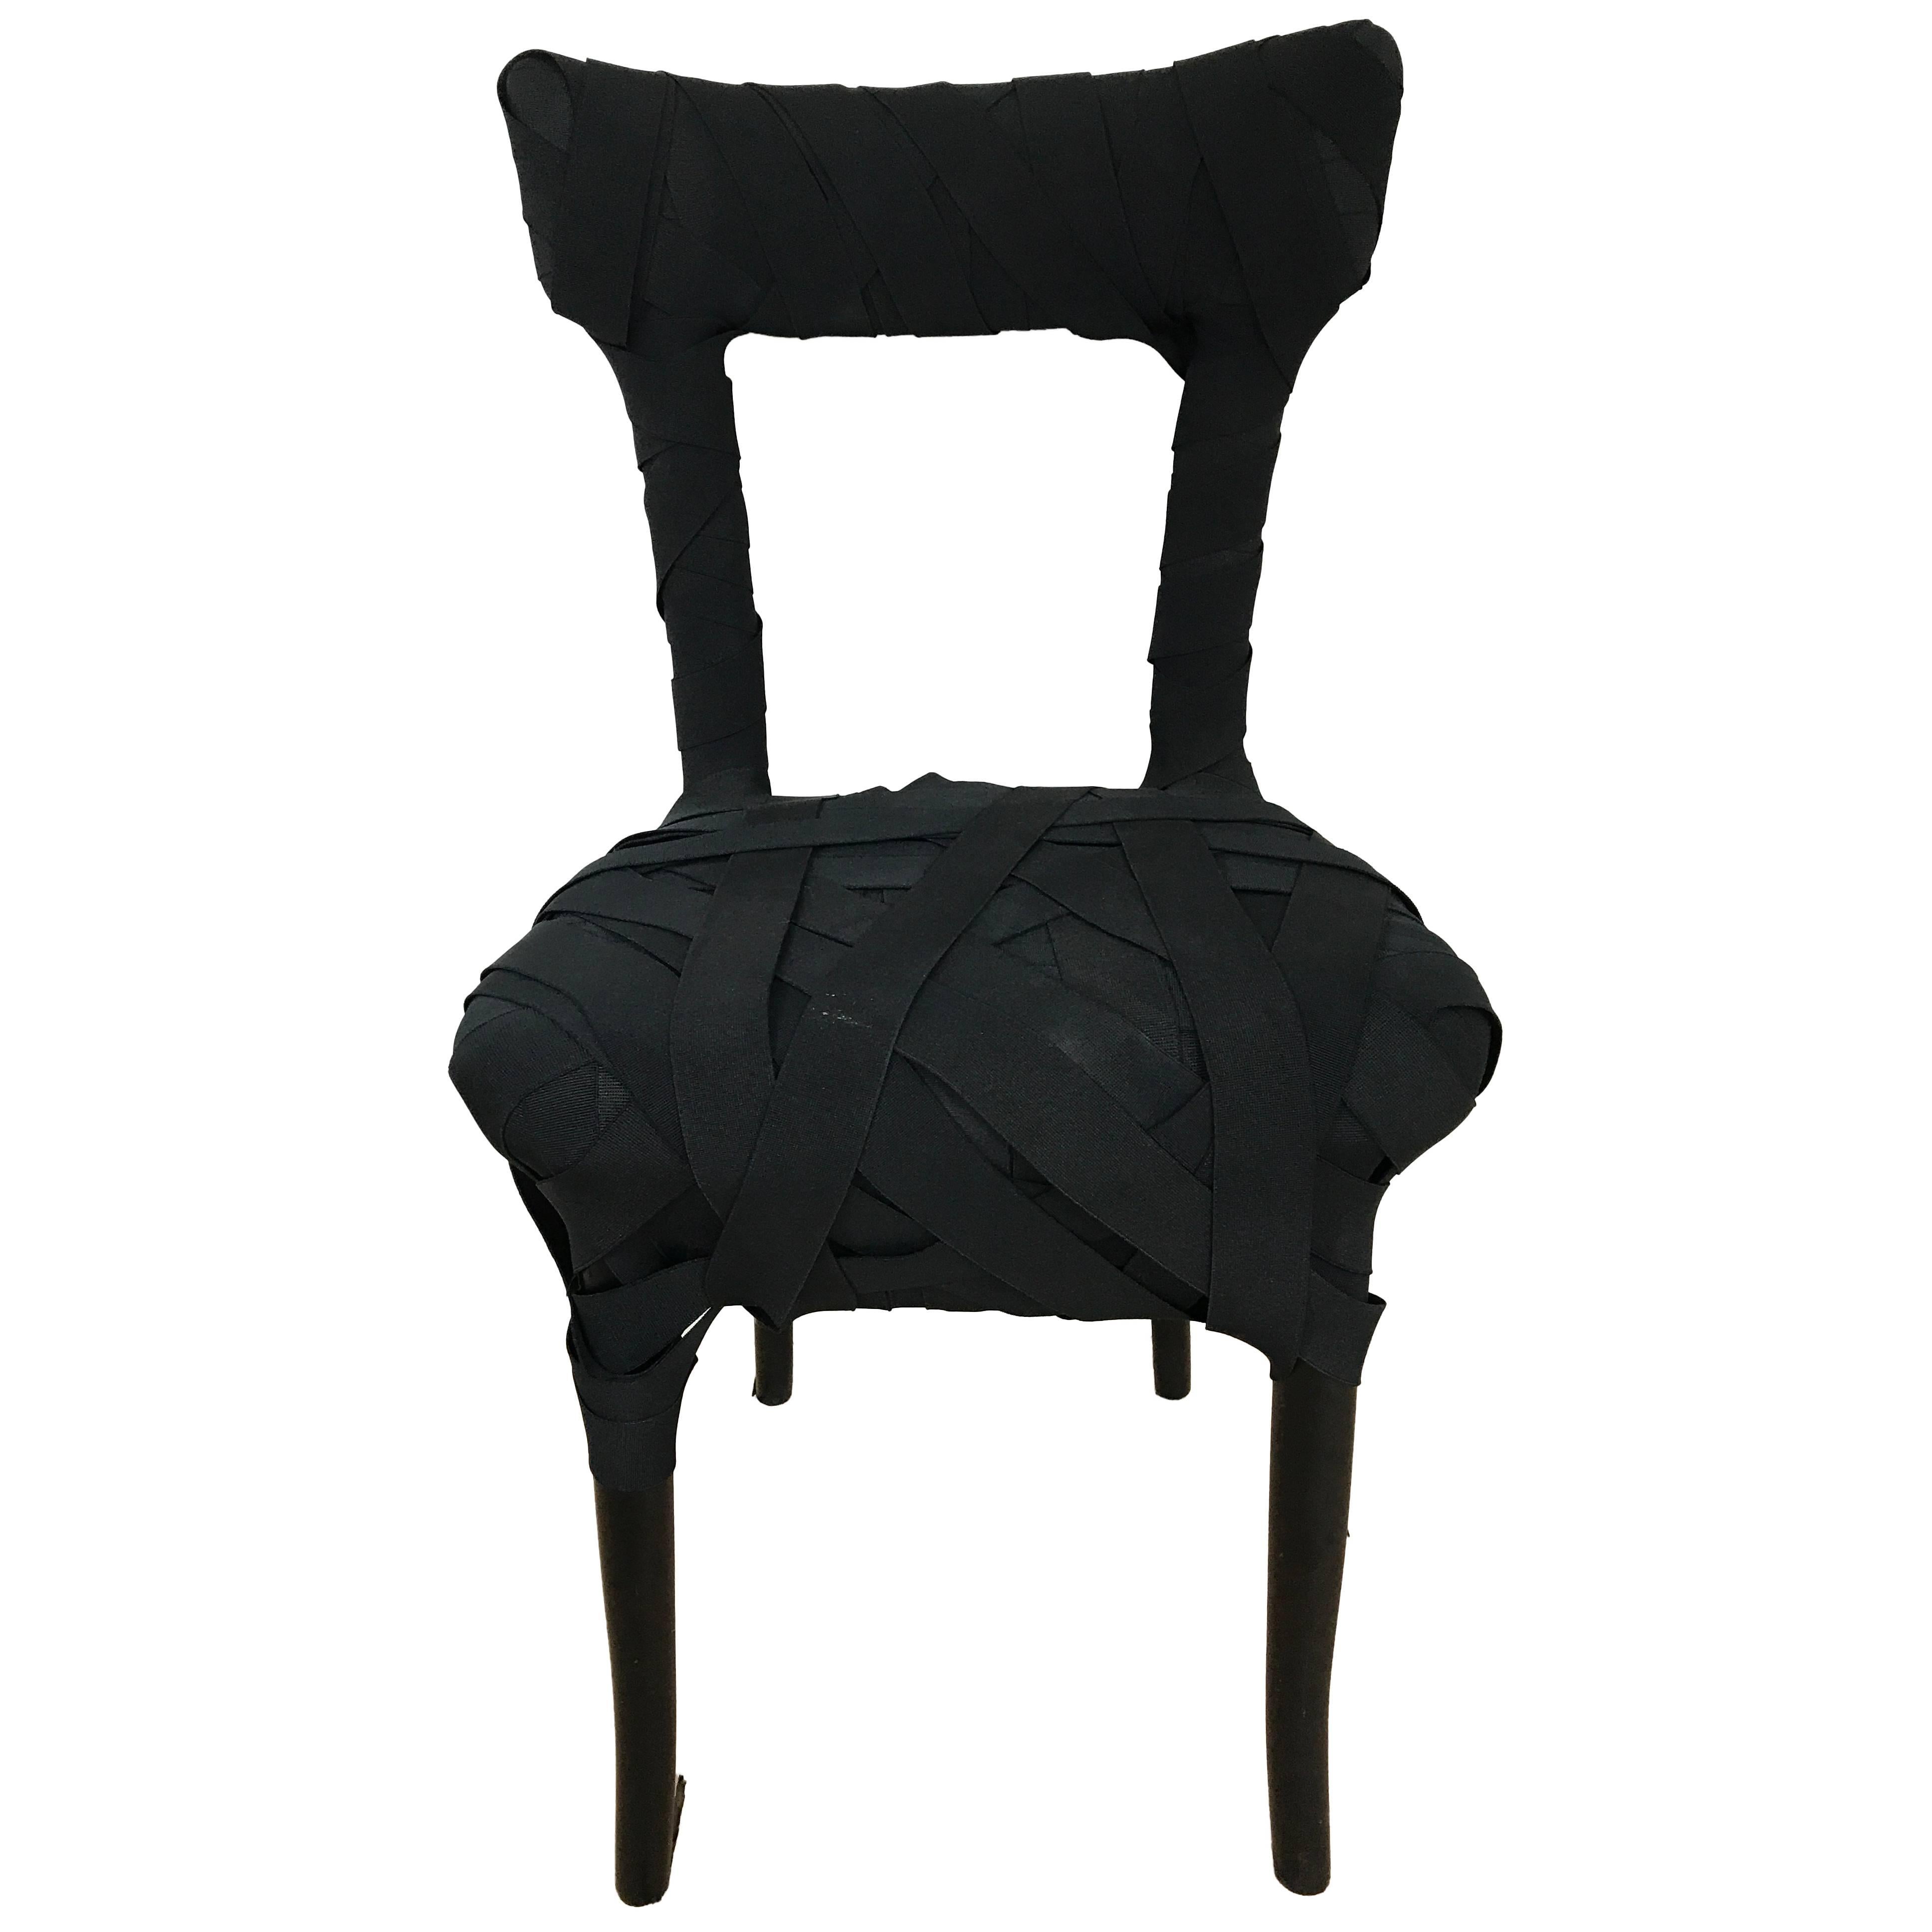 Peter Traag for Edra "Mummy" Chair